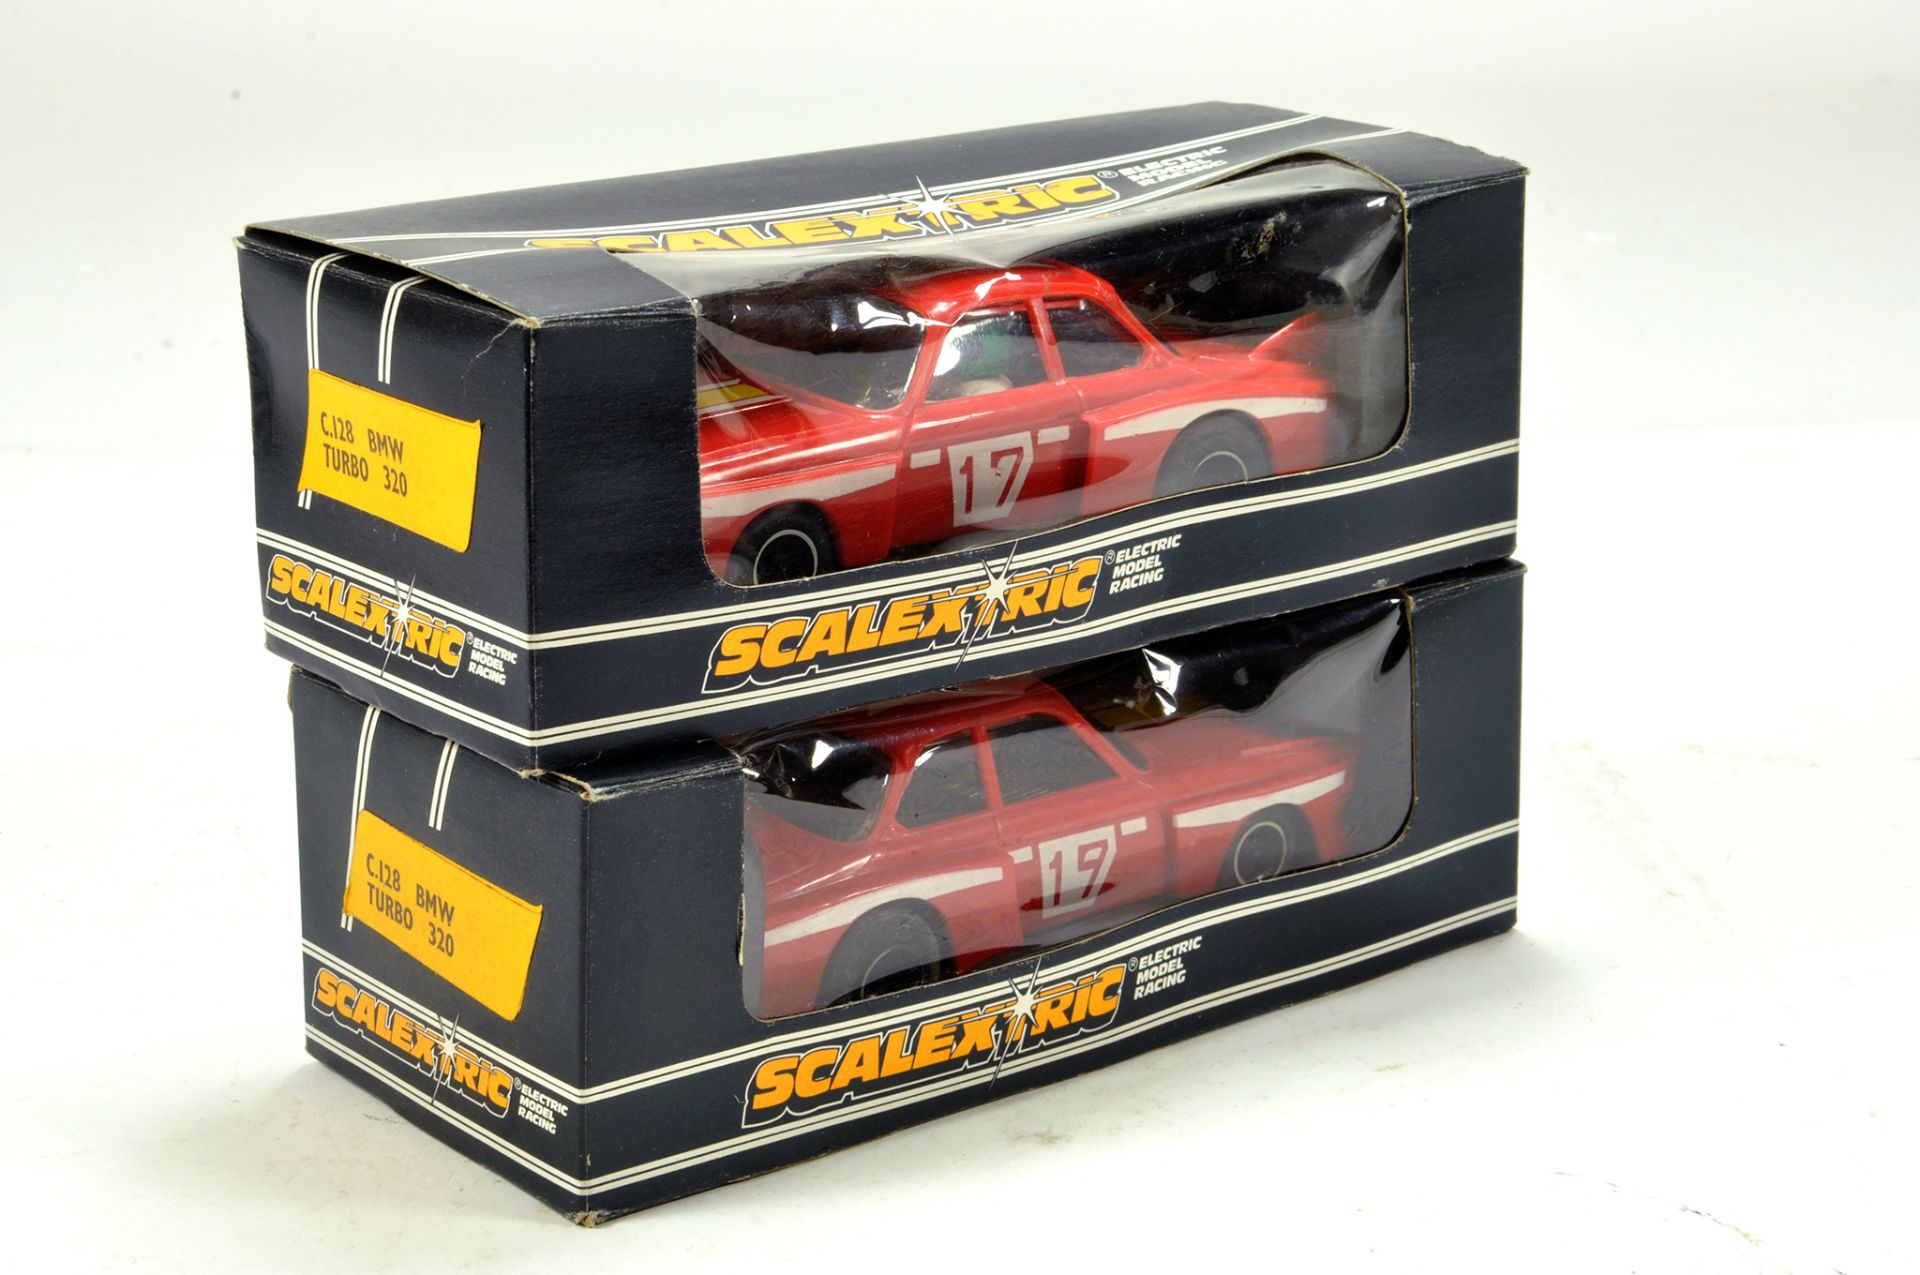 Vintage Scalextric Duo comprising C.128 BMW 320 Turbo. Untested but display well in original